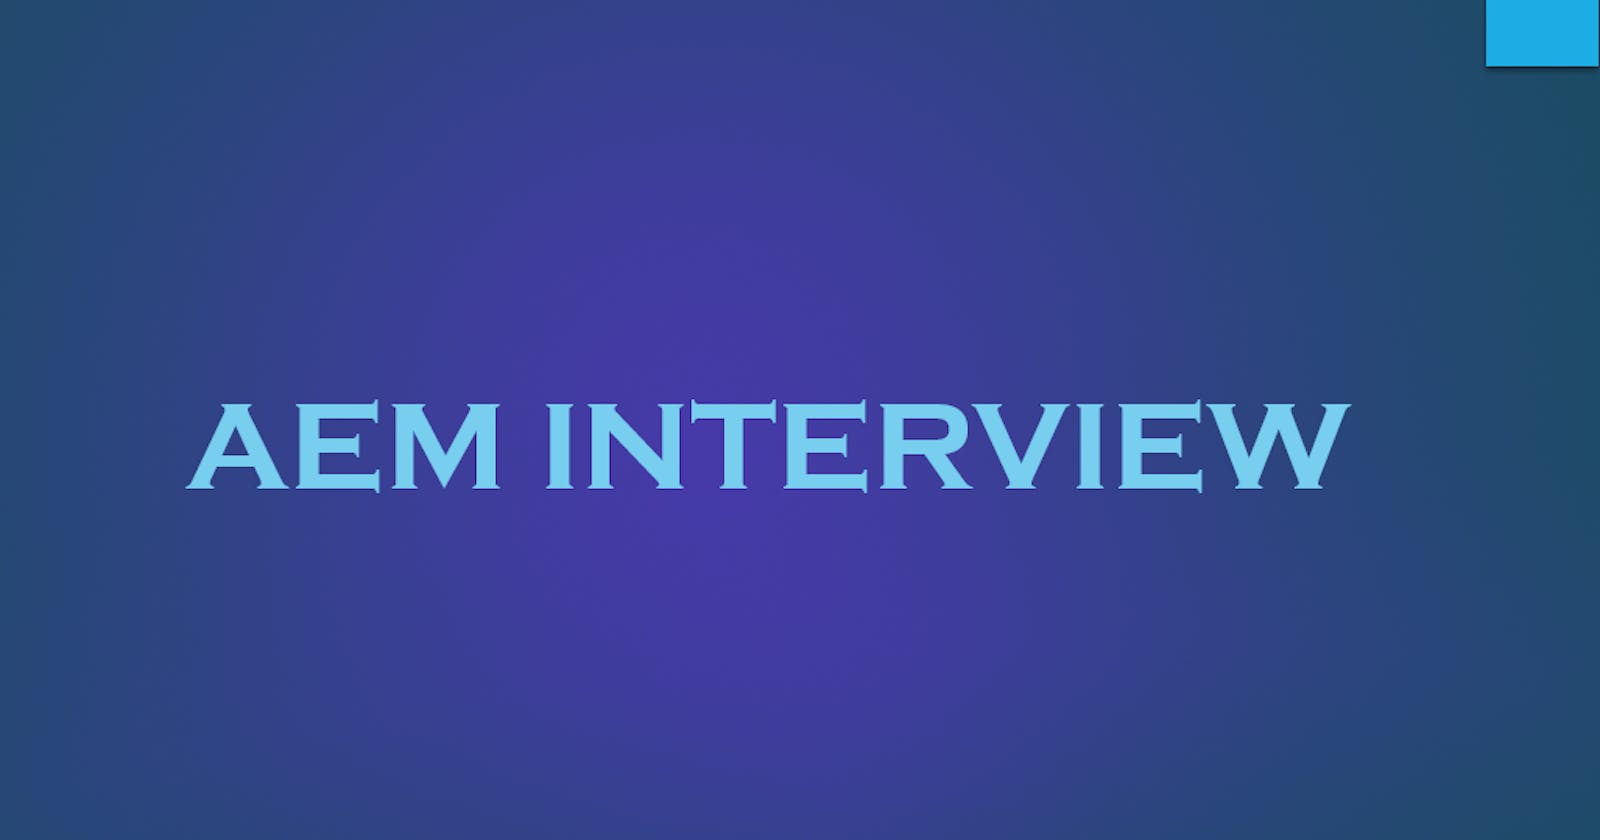 How to prepare for Adobe Experience Manager (AEM Developer) Interviews?